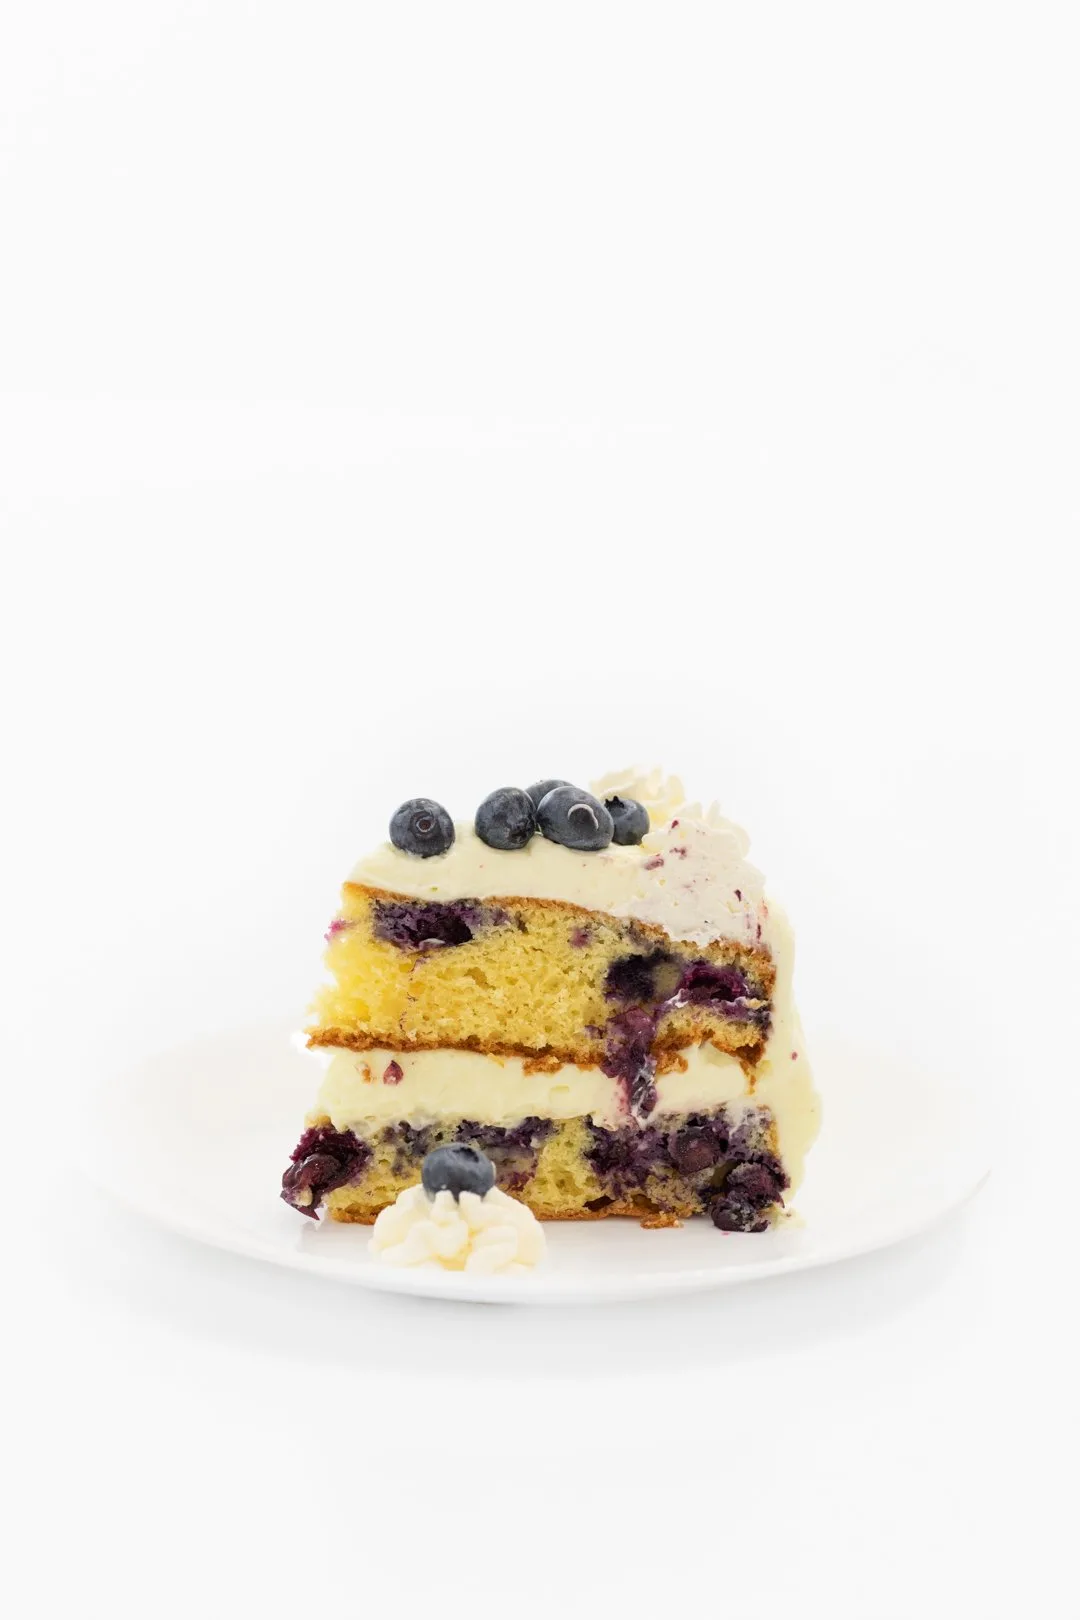 Tall slice of blueberry cake with fresh blueberries